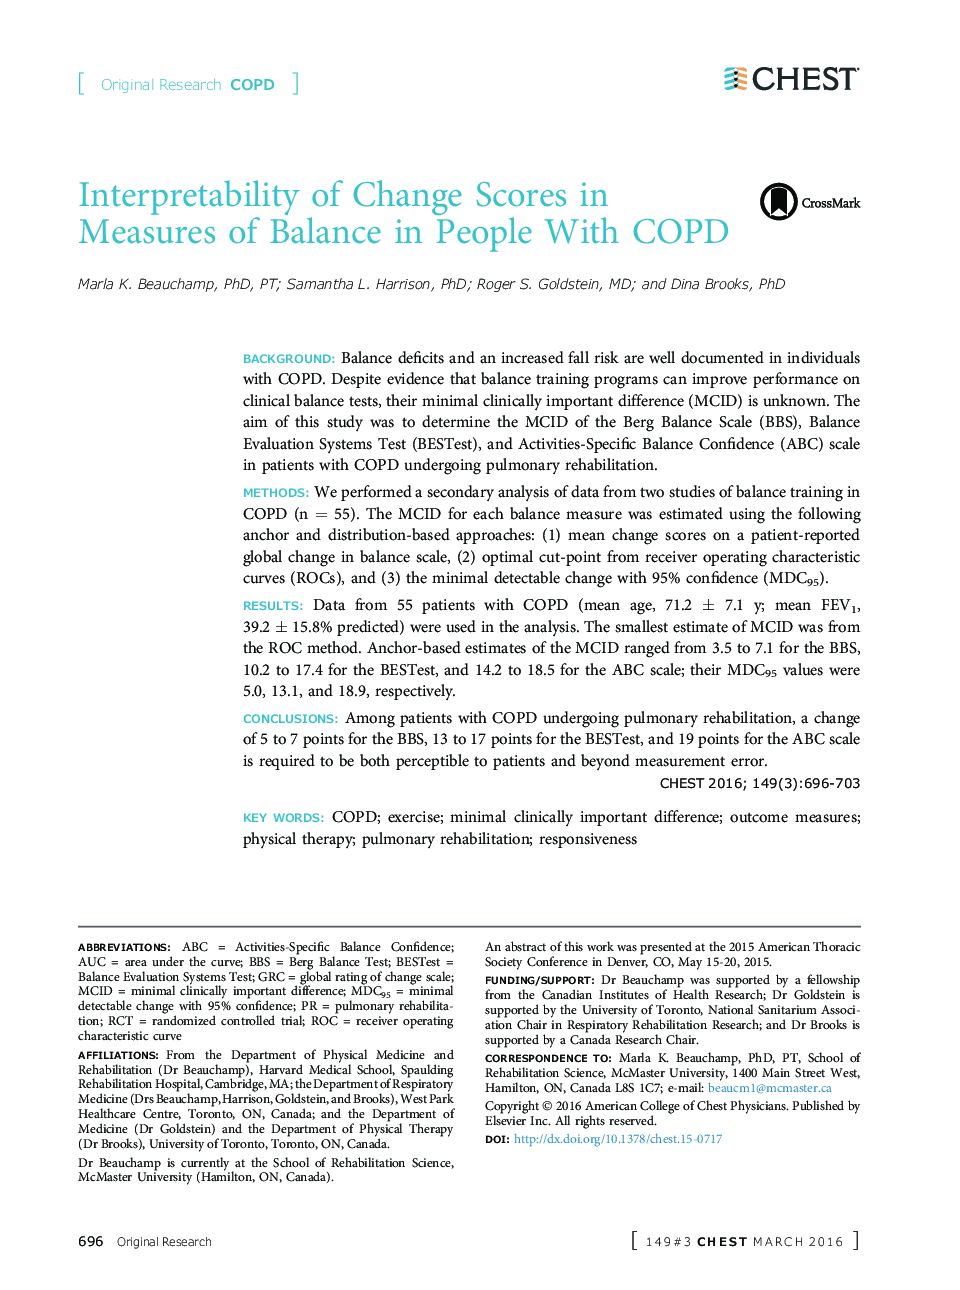 Interpretability of Change Scores in Measures of Balance in People With COPD